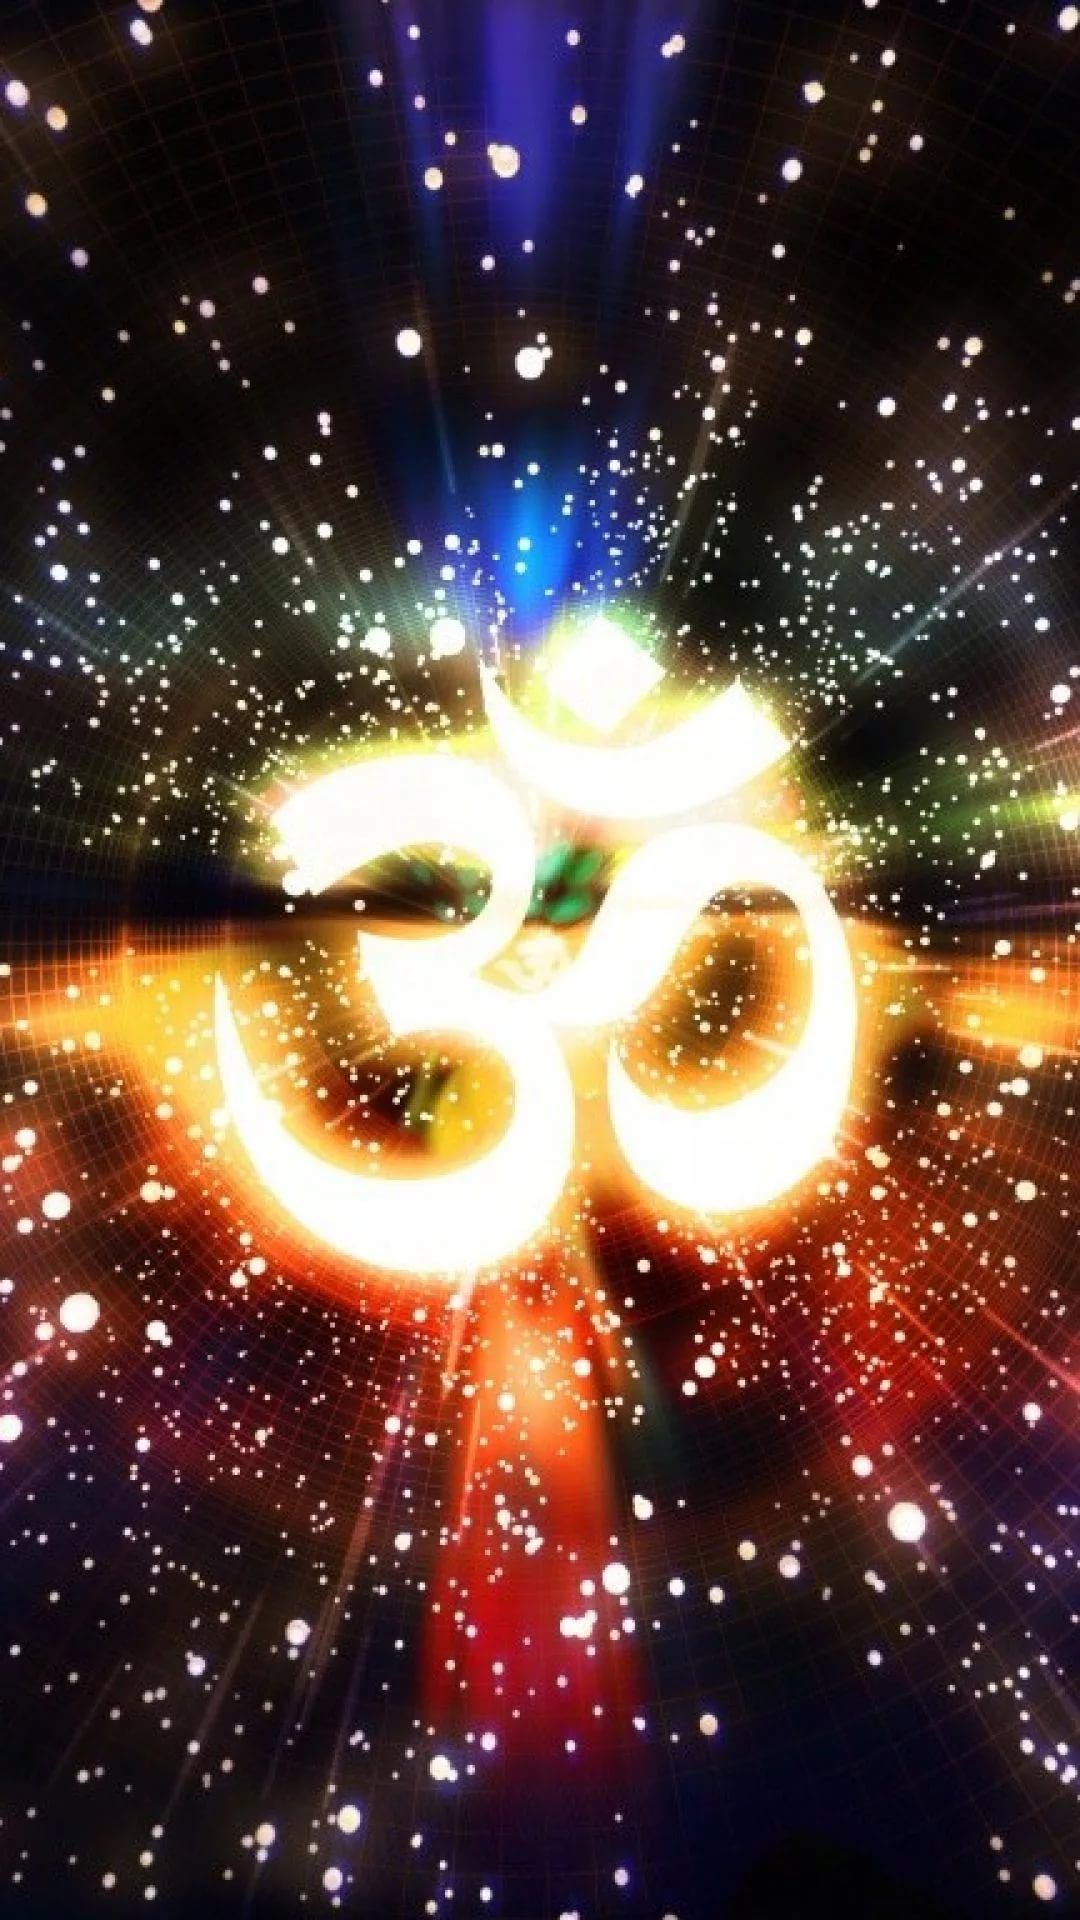 Om Mantra cool wallpapers for iPhone 6